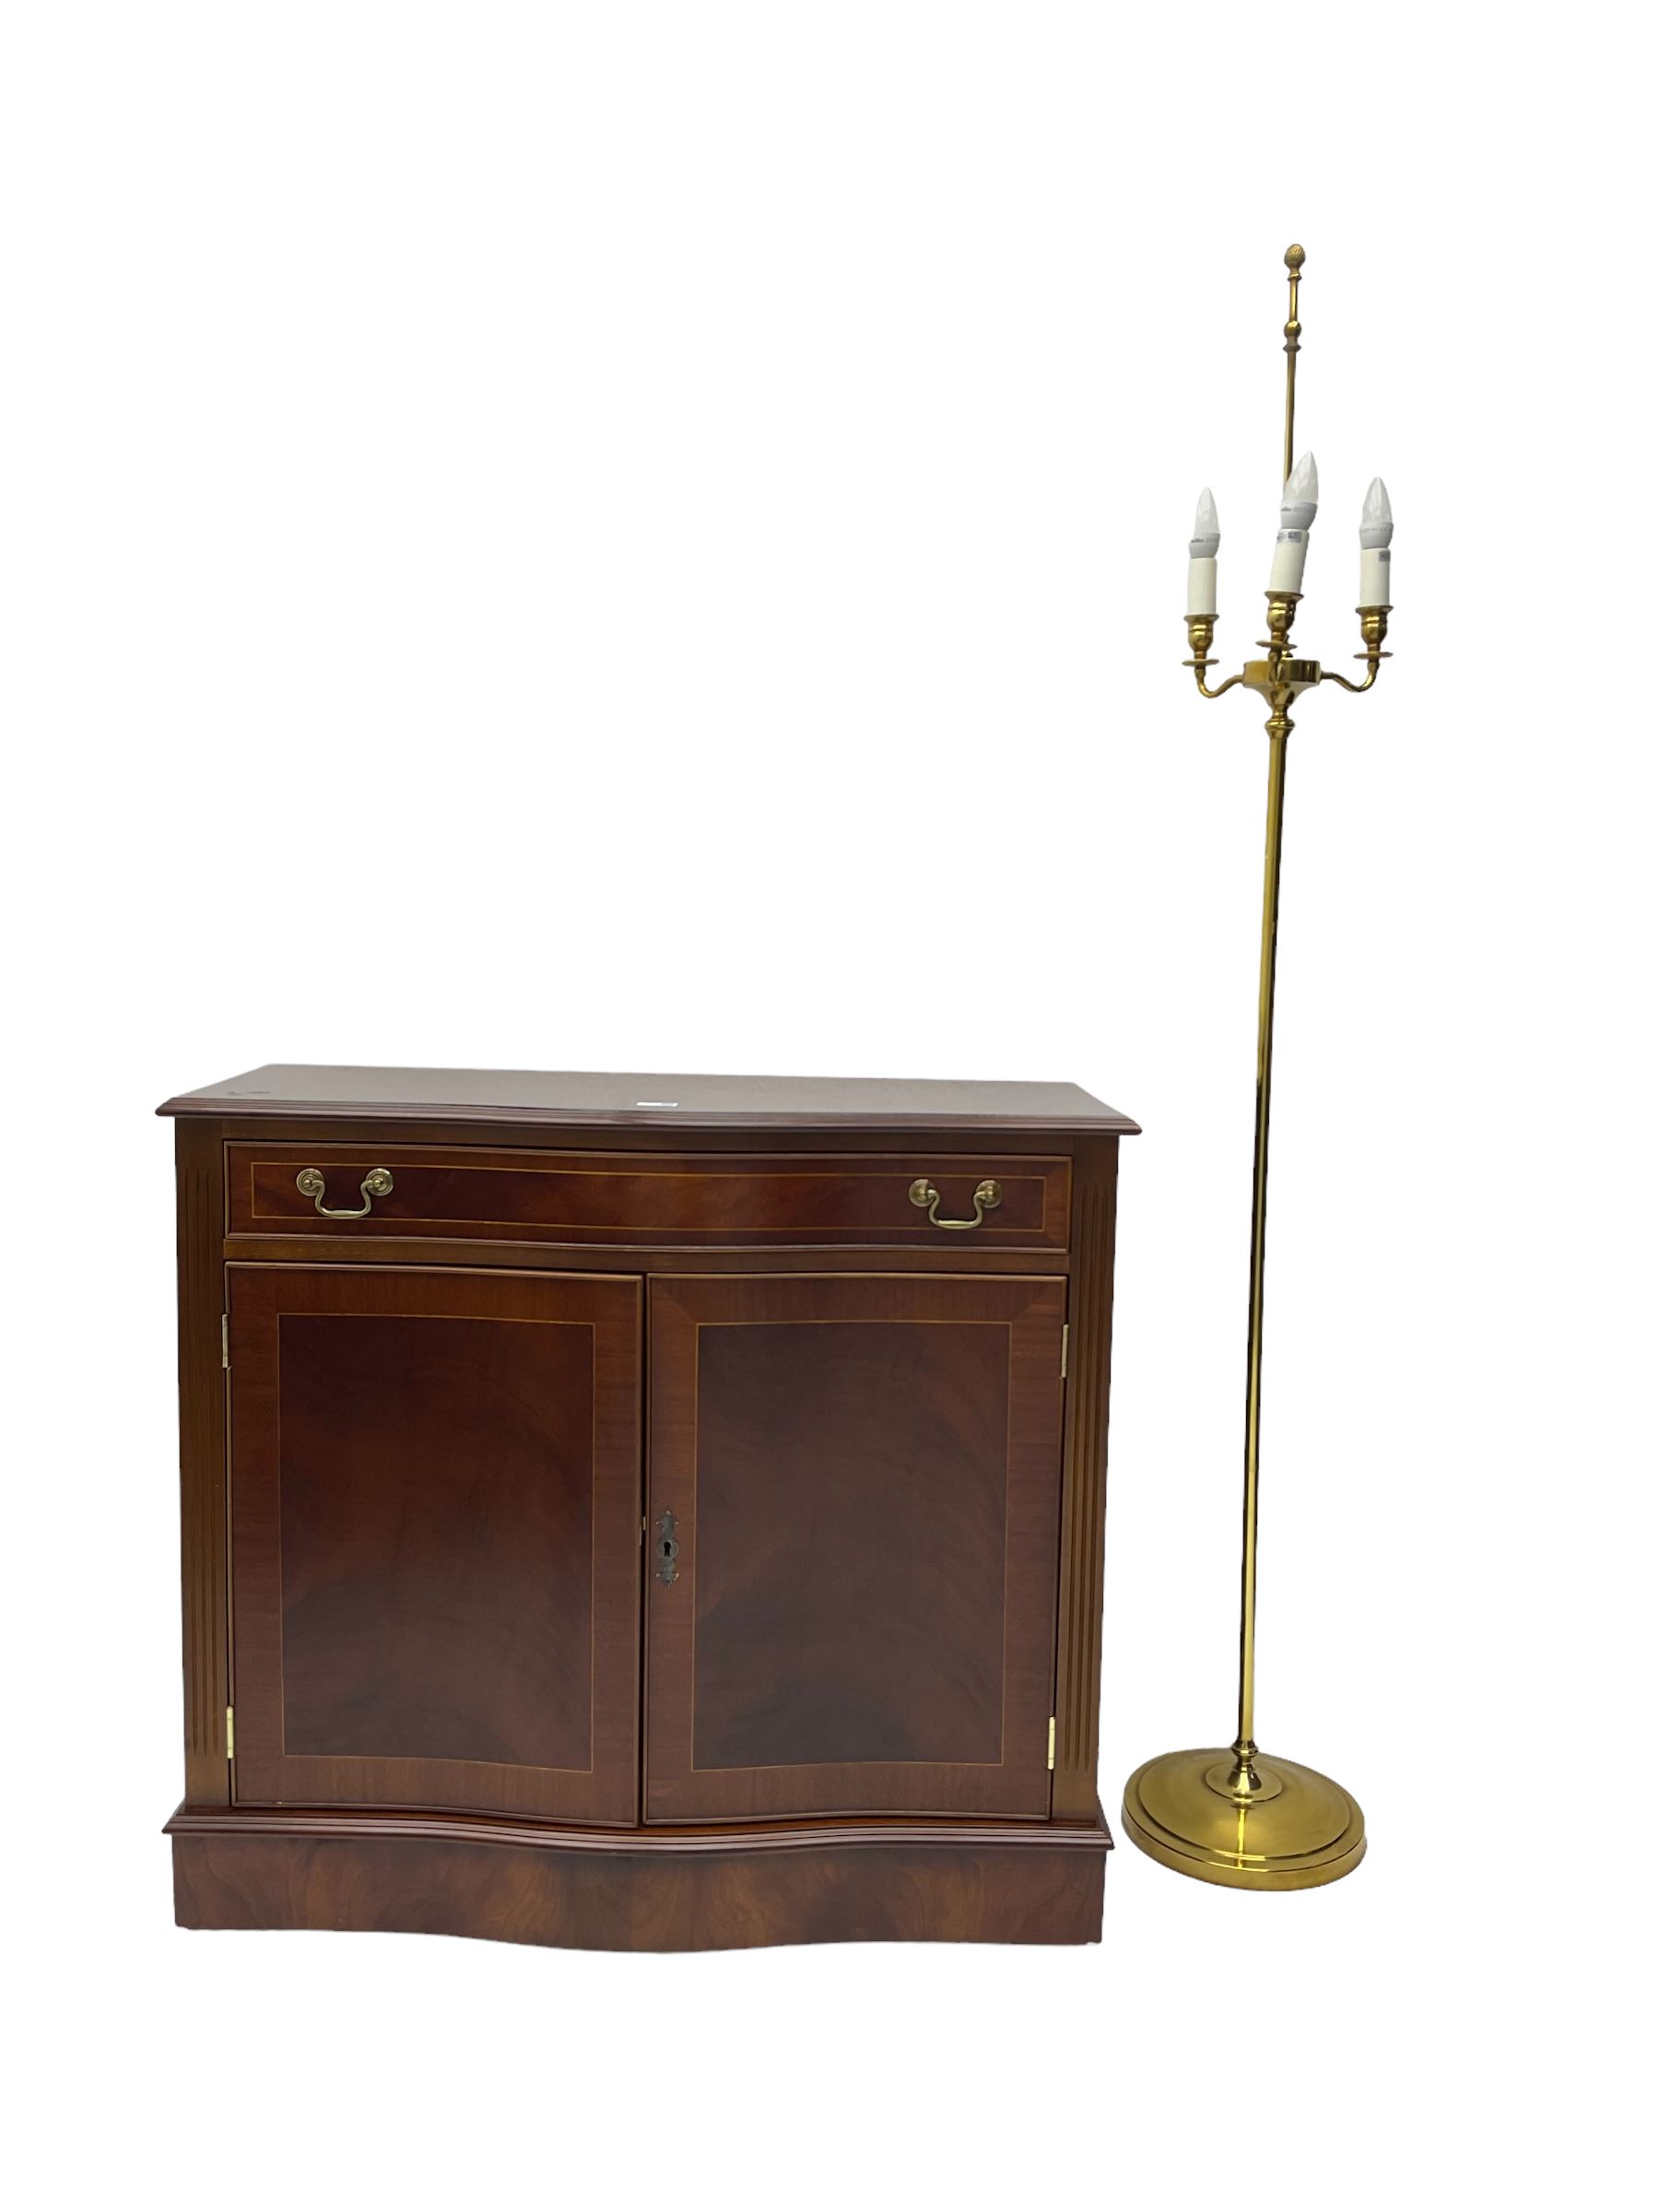 Repro mahogany Regency style sideboard and standard lamp - Image 2 of 2